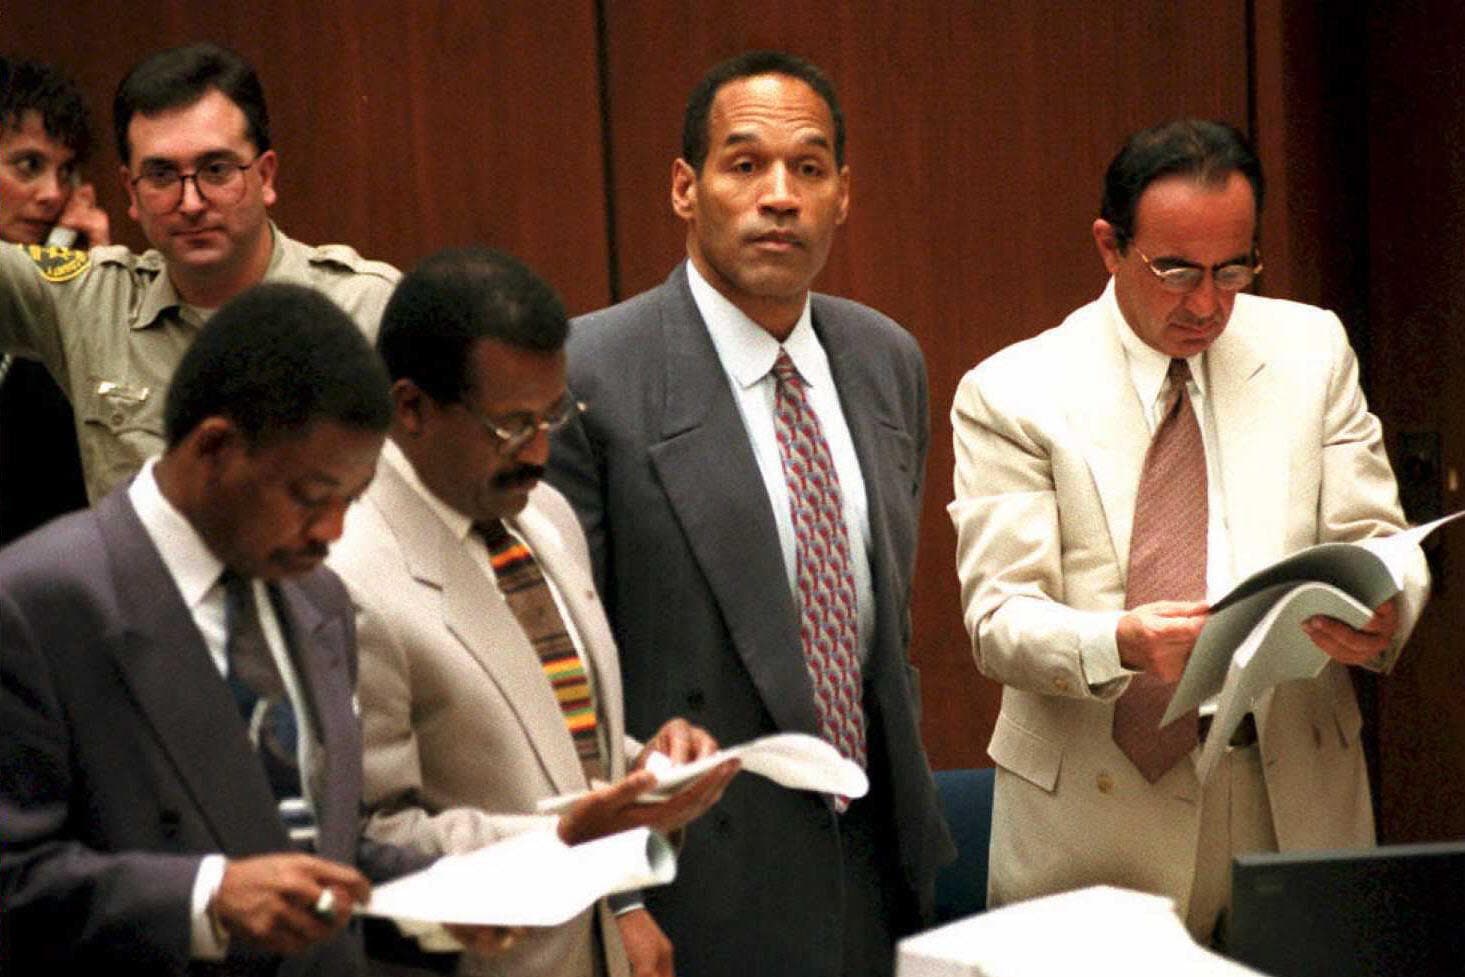 25 Years On, The Lasting Cultural Impact Of The O.J. Simpson Trial | WBUR